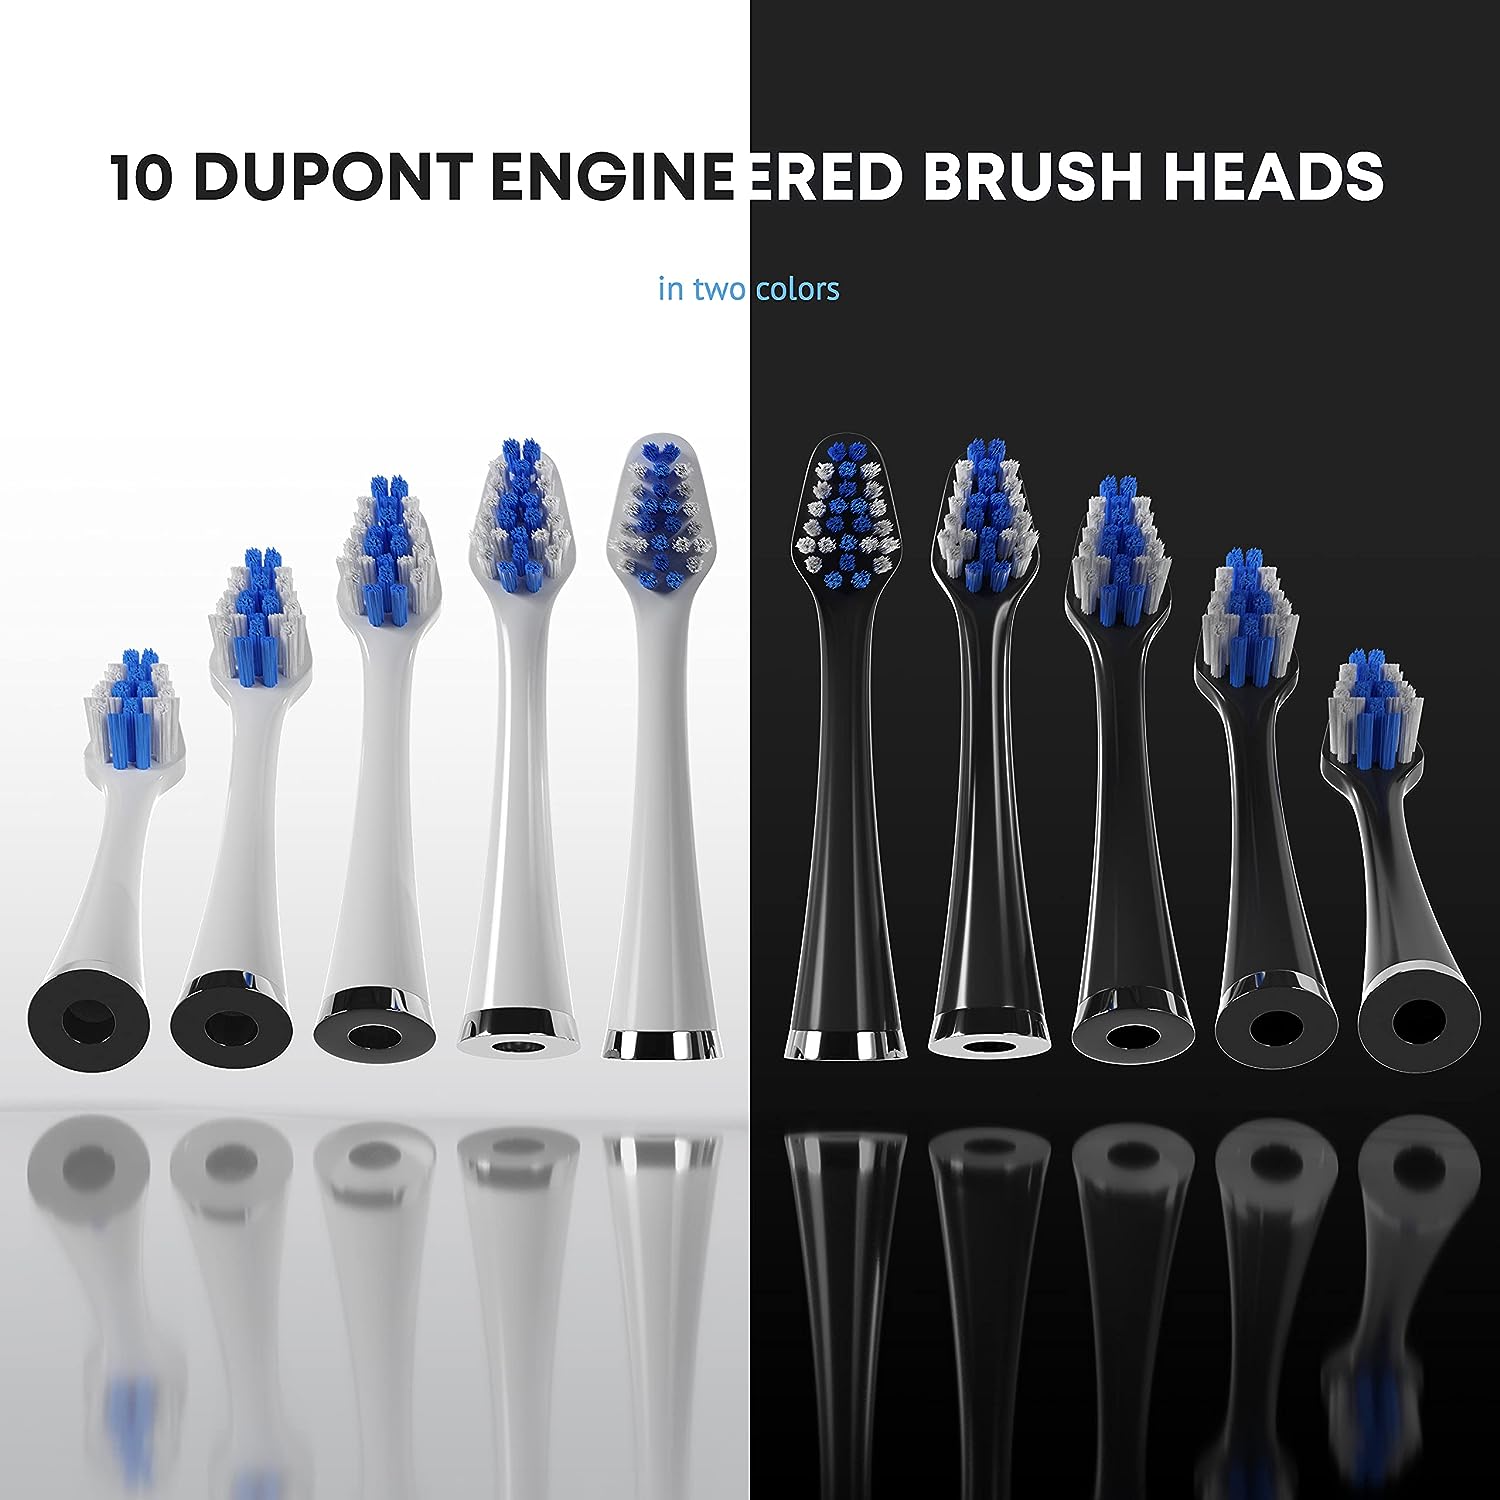 Aquasonic Electric ToothBrush Duo Series with 10 DuPont Brush Heads & 2 Travel Cases - image 5 of 7